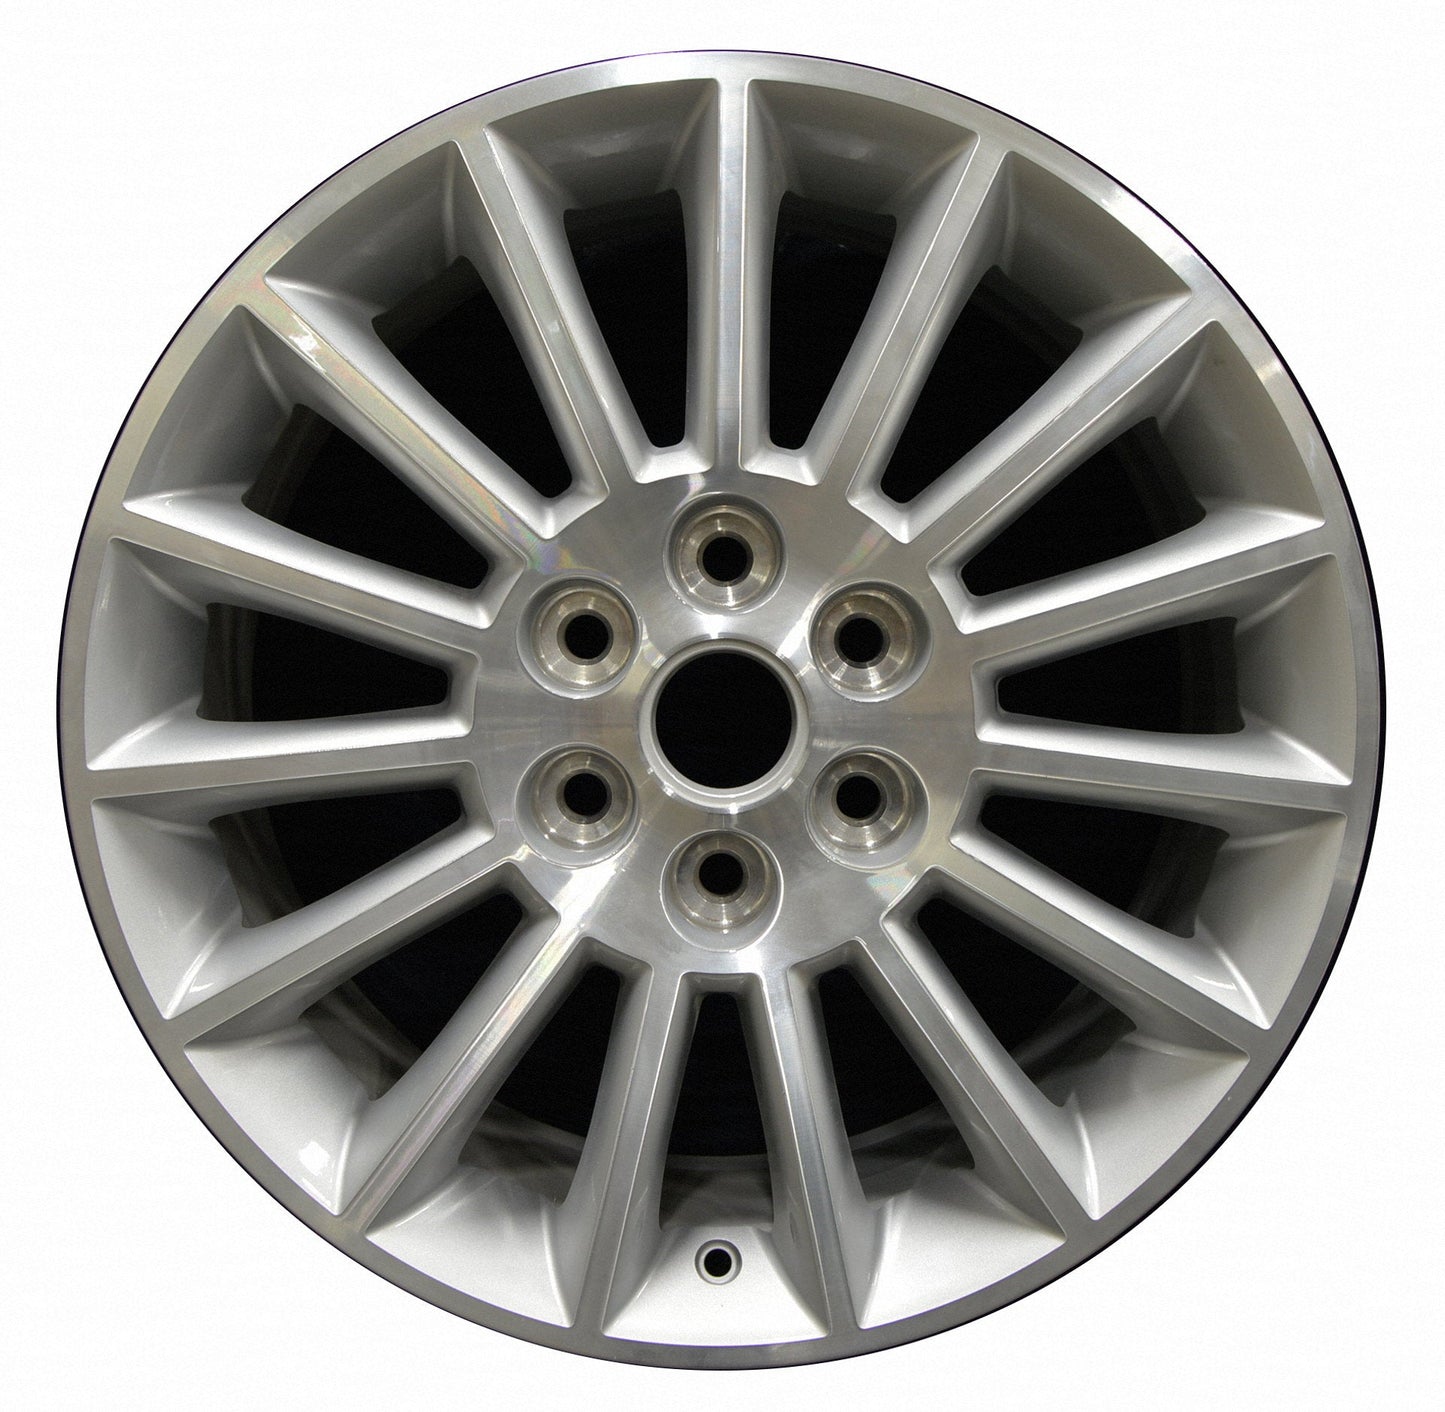 Buick Enclave  2008, 2009, 2010, 2011, 2012 Factory OEM Car Wheel Size 19x7.5 Alloy WAO.4079.PS07.MA